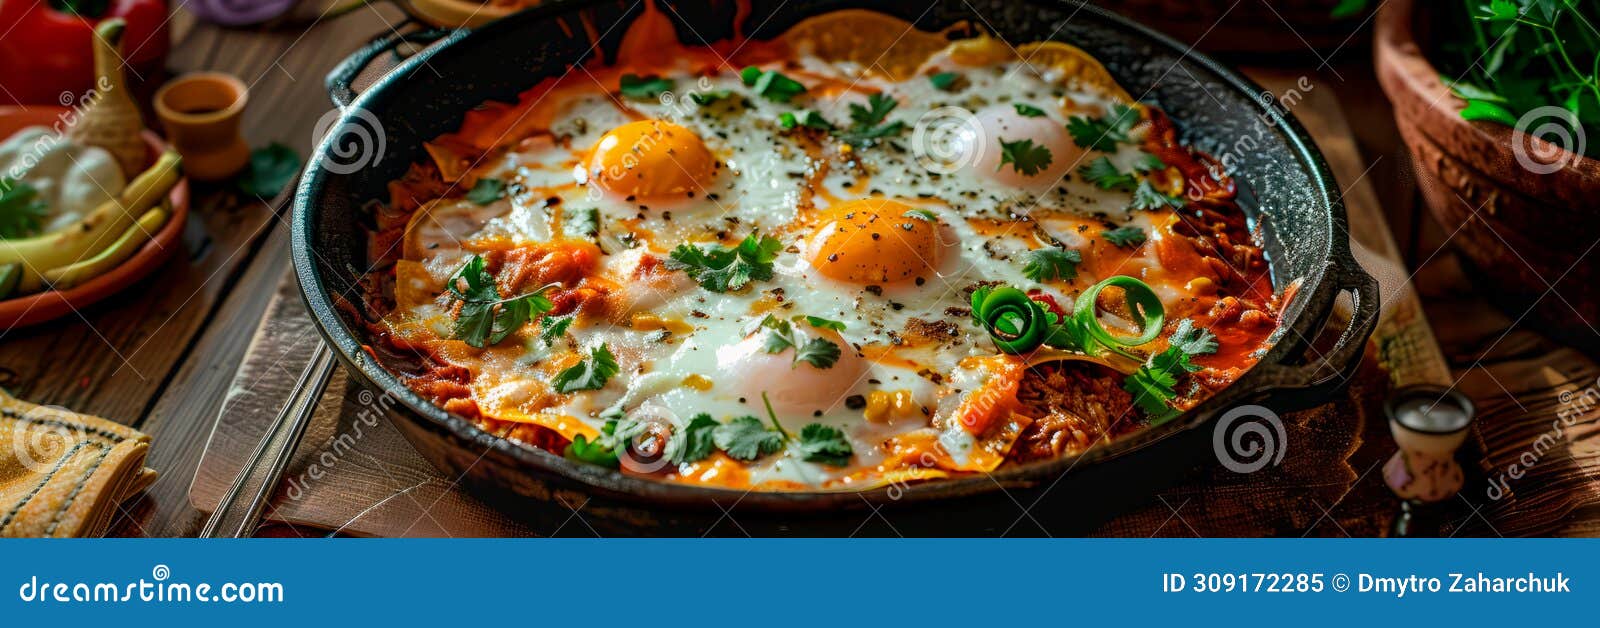 a traditional mexican breakfast with dishes such as chilaquiles.